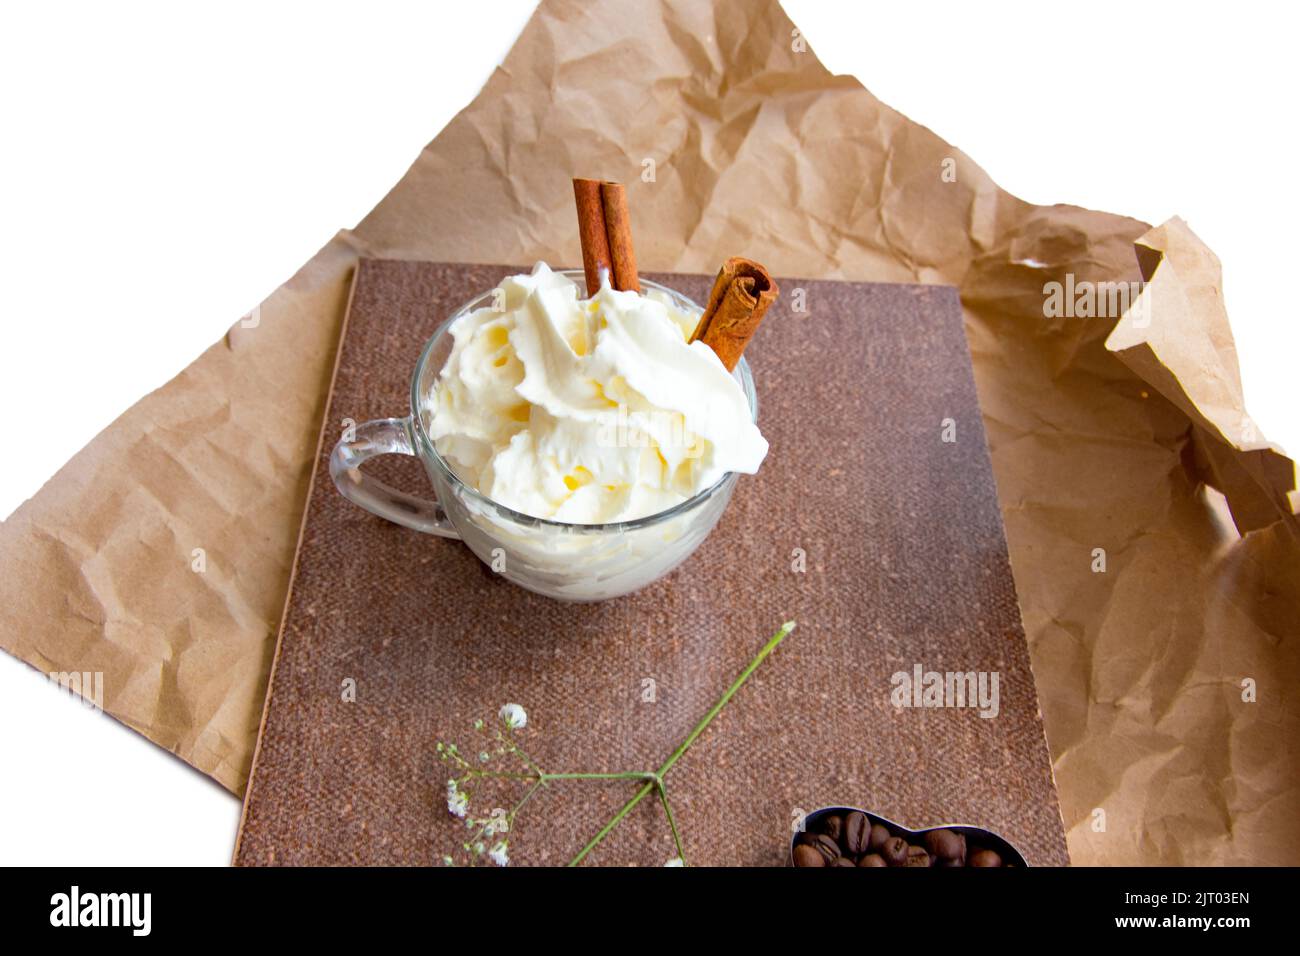 branch of flowers, heart form coffee beans, cinnamon sticks, whipped cream in a glass cup composition in brown tones on crumpled wrapping paper Stock Photo